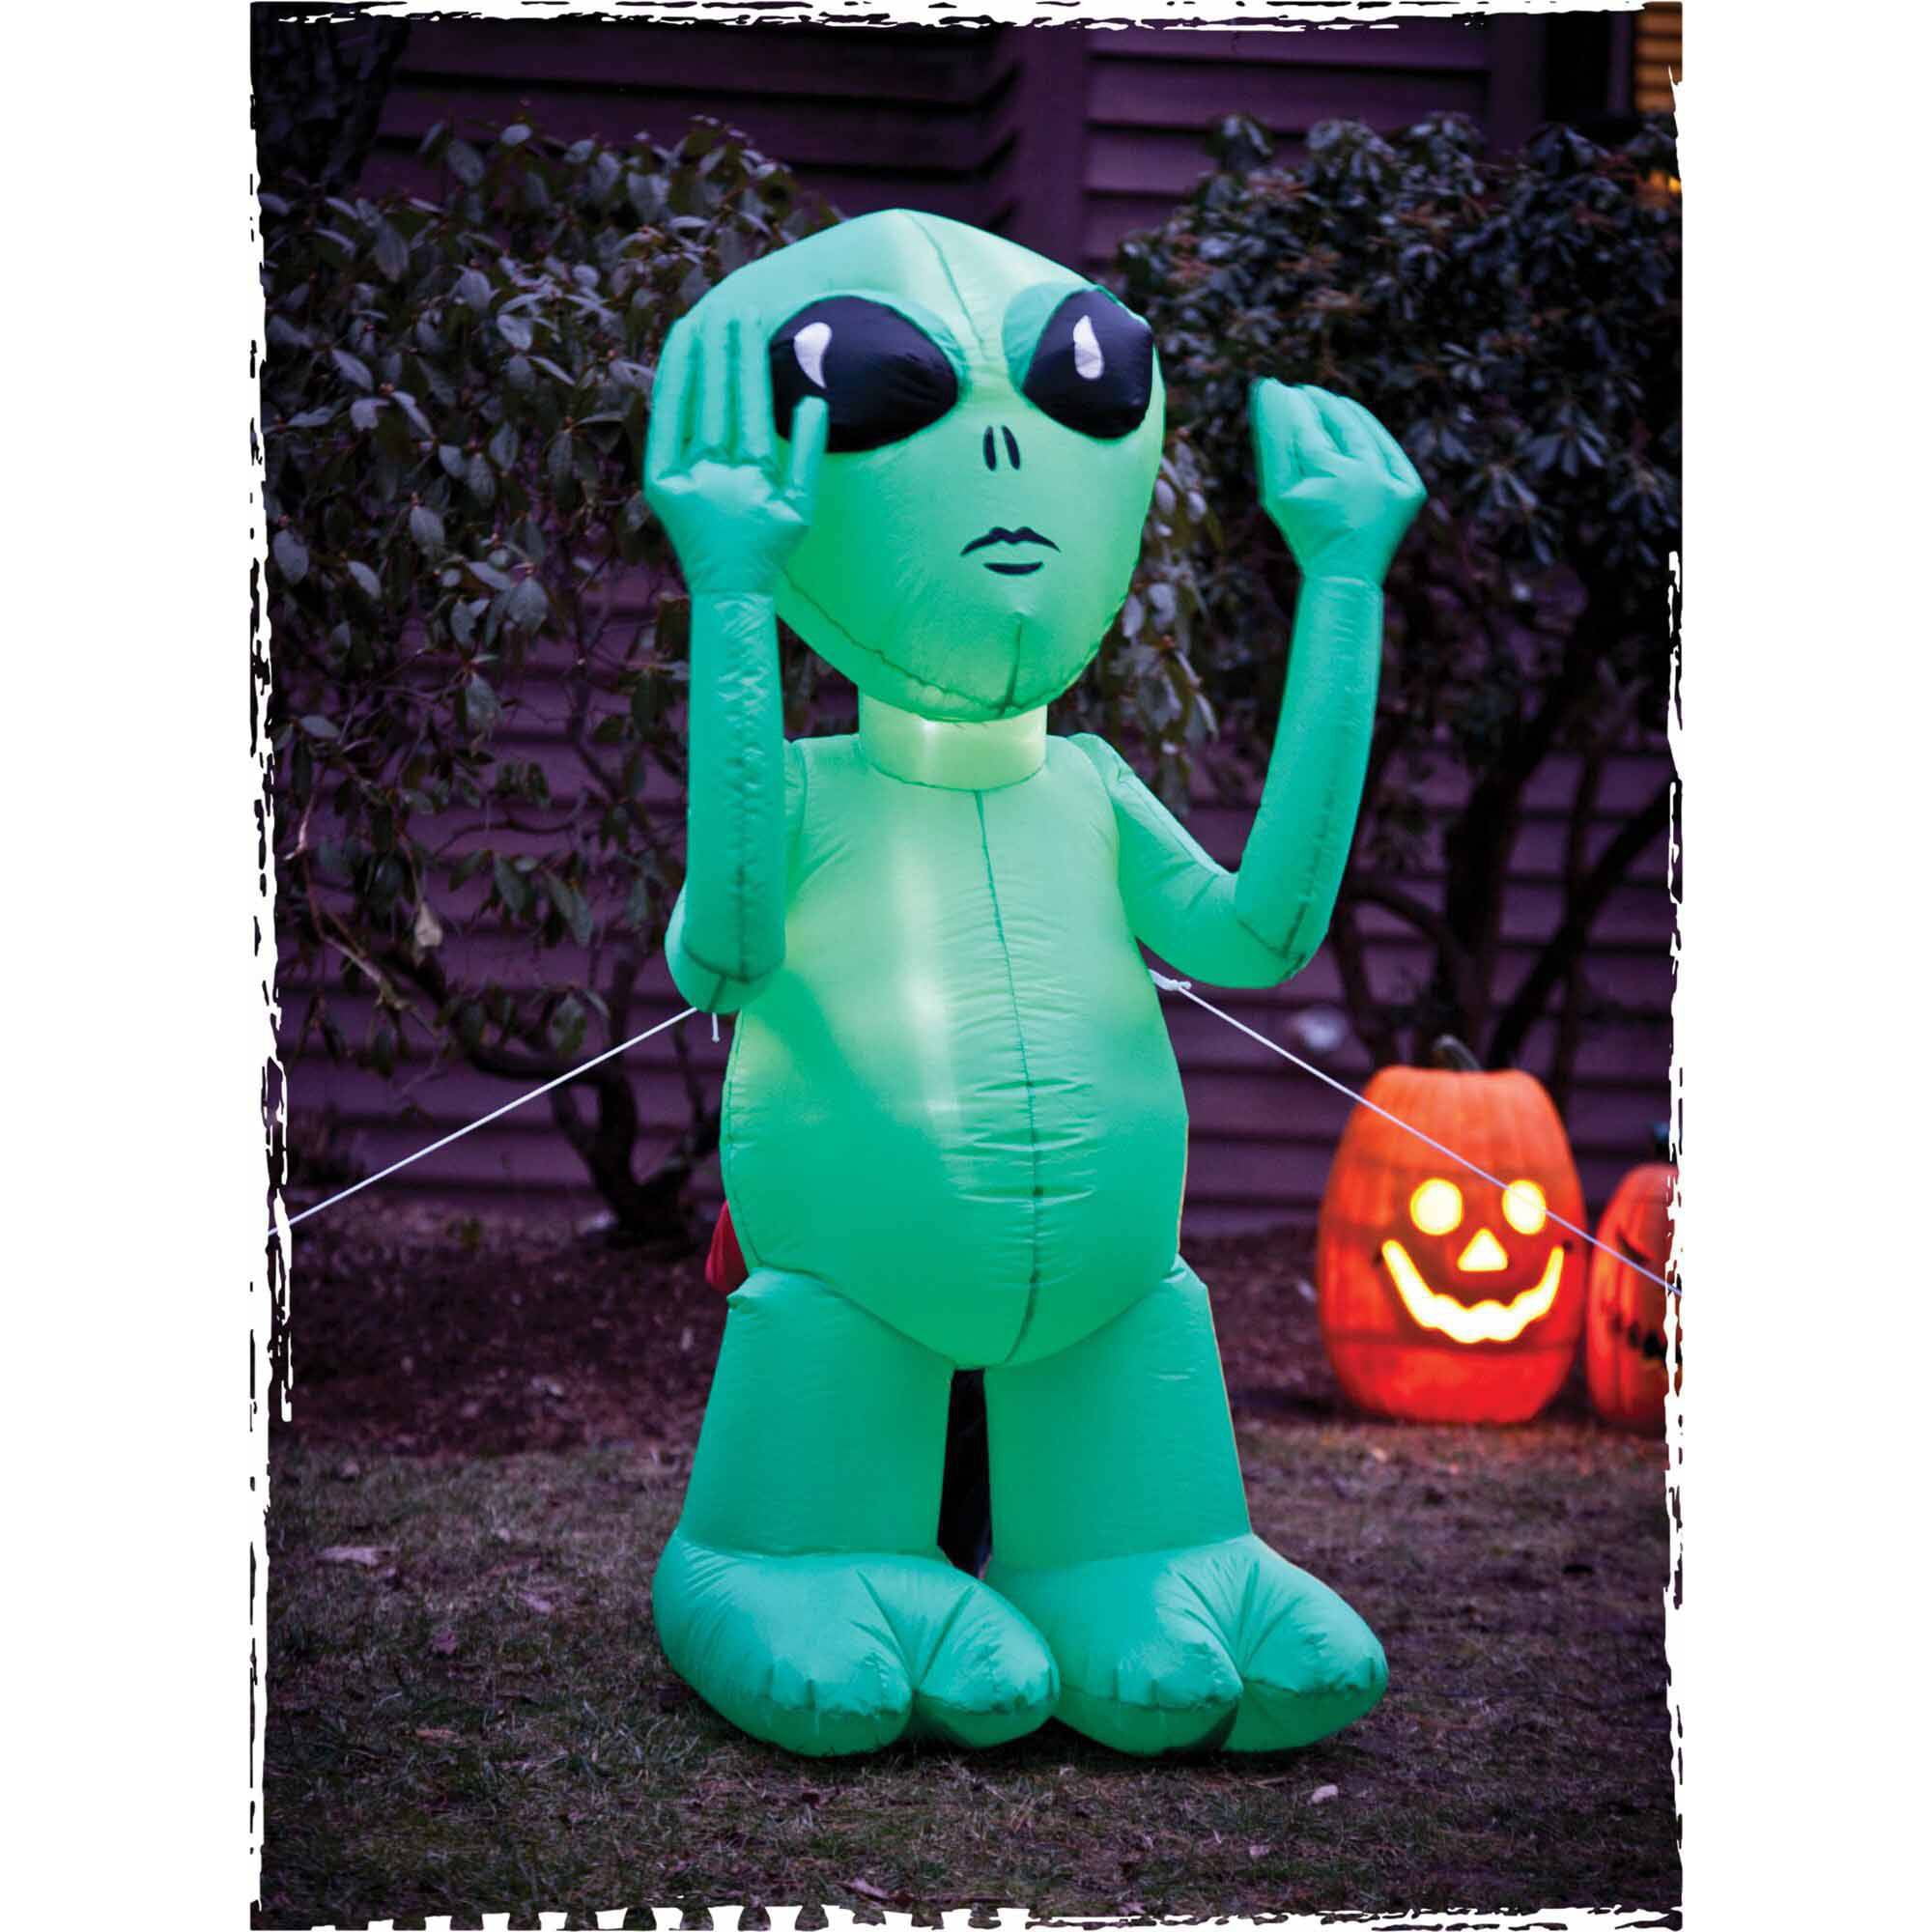 Blow Up Toy loot Green Inflatable Alien Toy Alien Themed party 60cm 